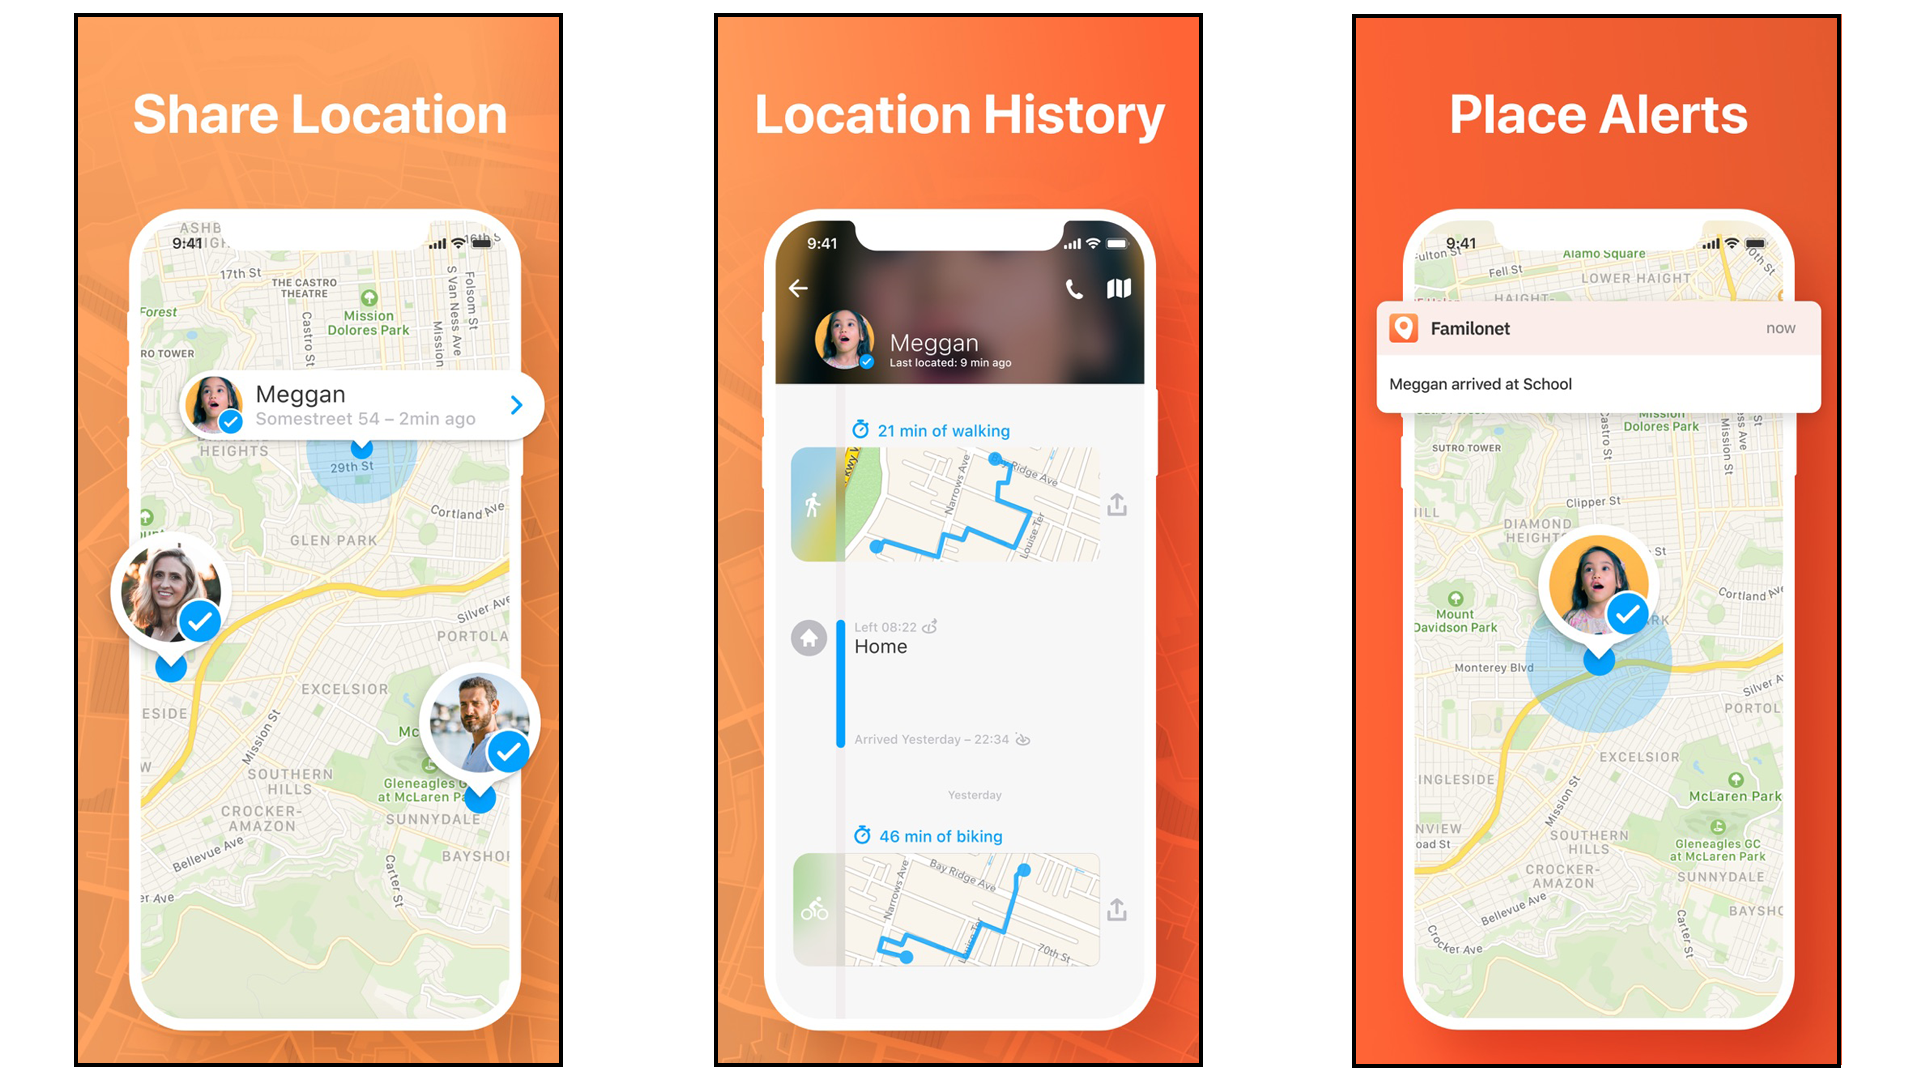 Familonet app showing current location, location history, and place alert options